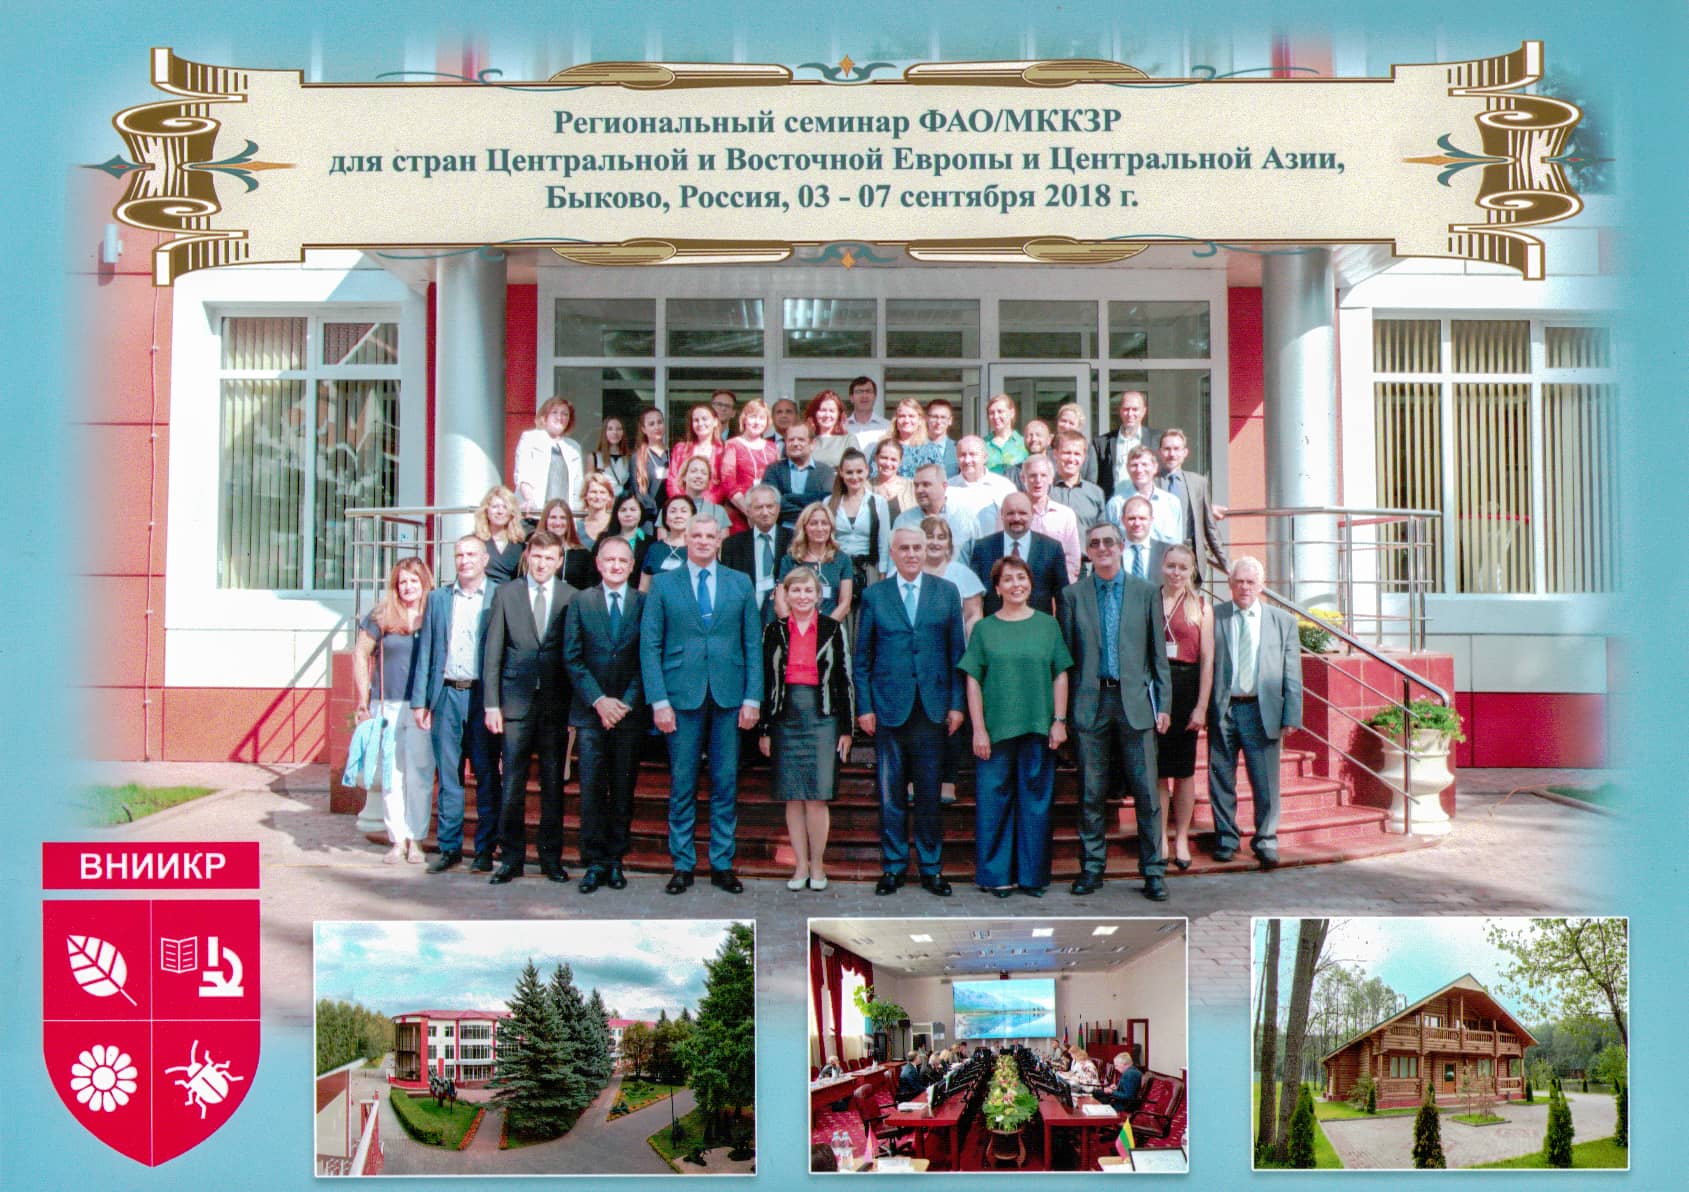 International Plant Quarantine Plant Protection Agreement / FAO (FAO / FAO REU) Regional Seminar in Central and Eastern Europe and Central Asia